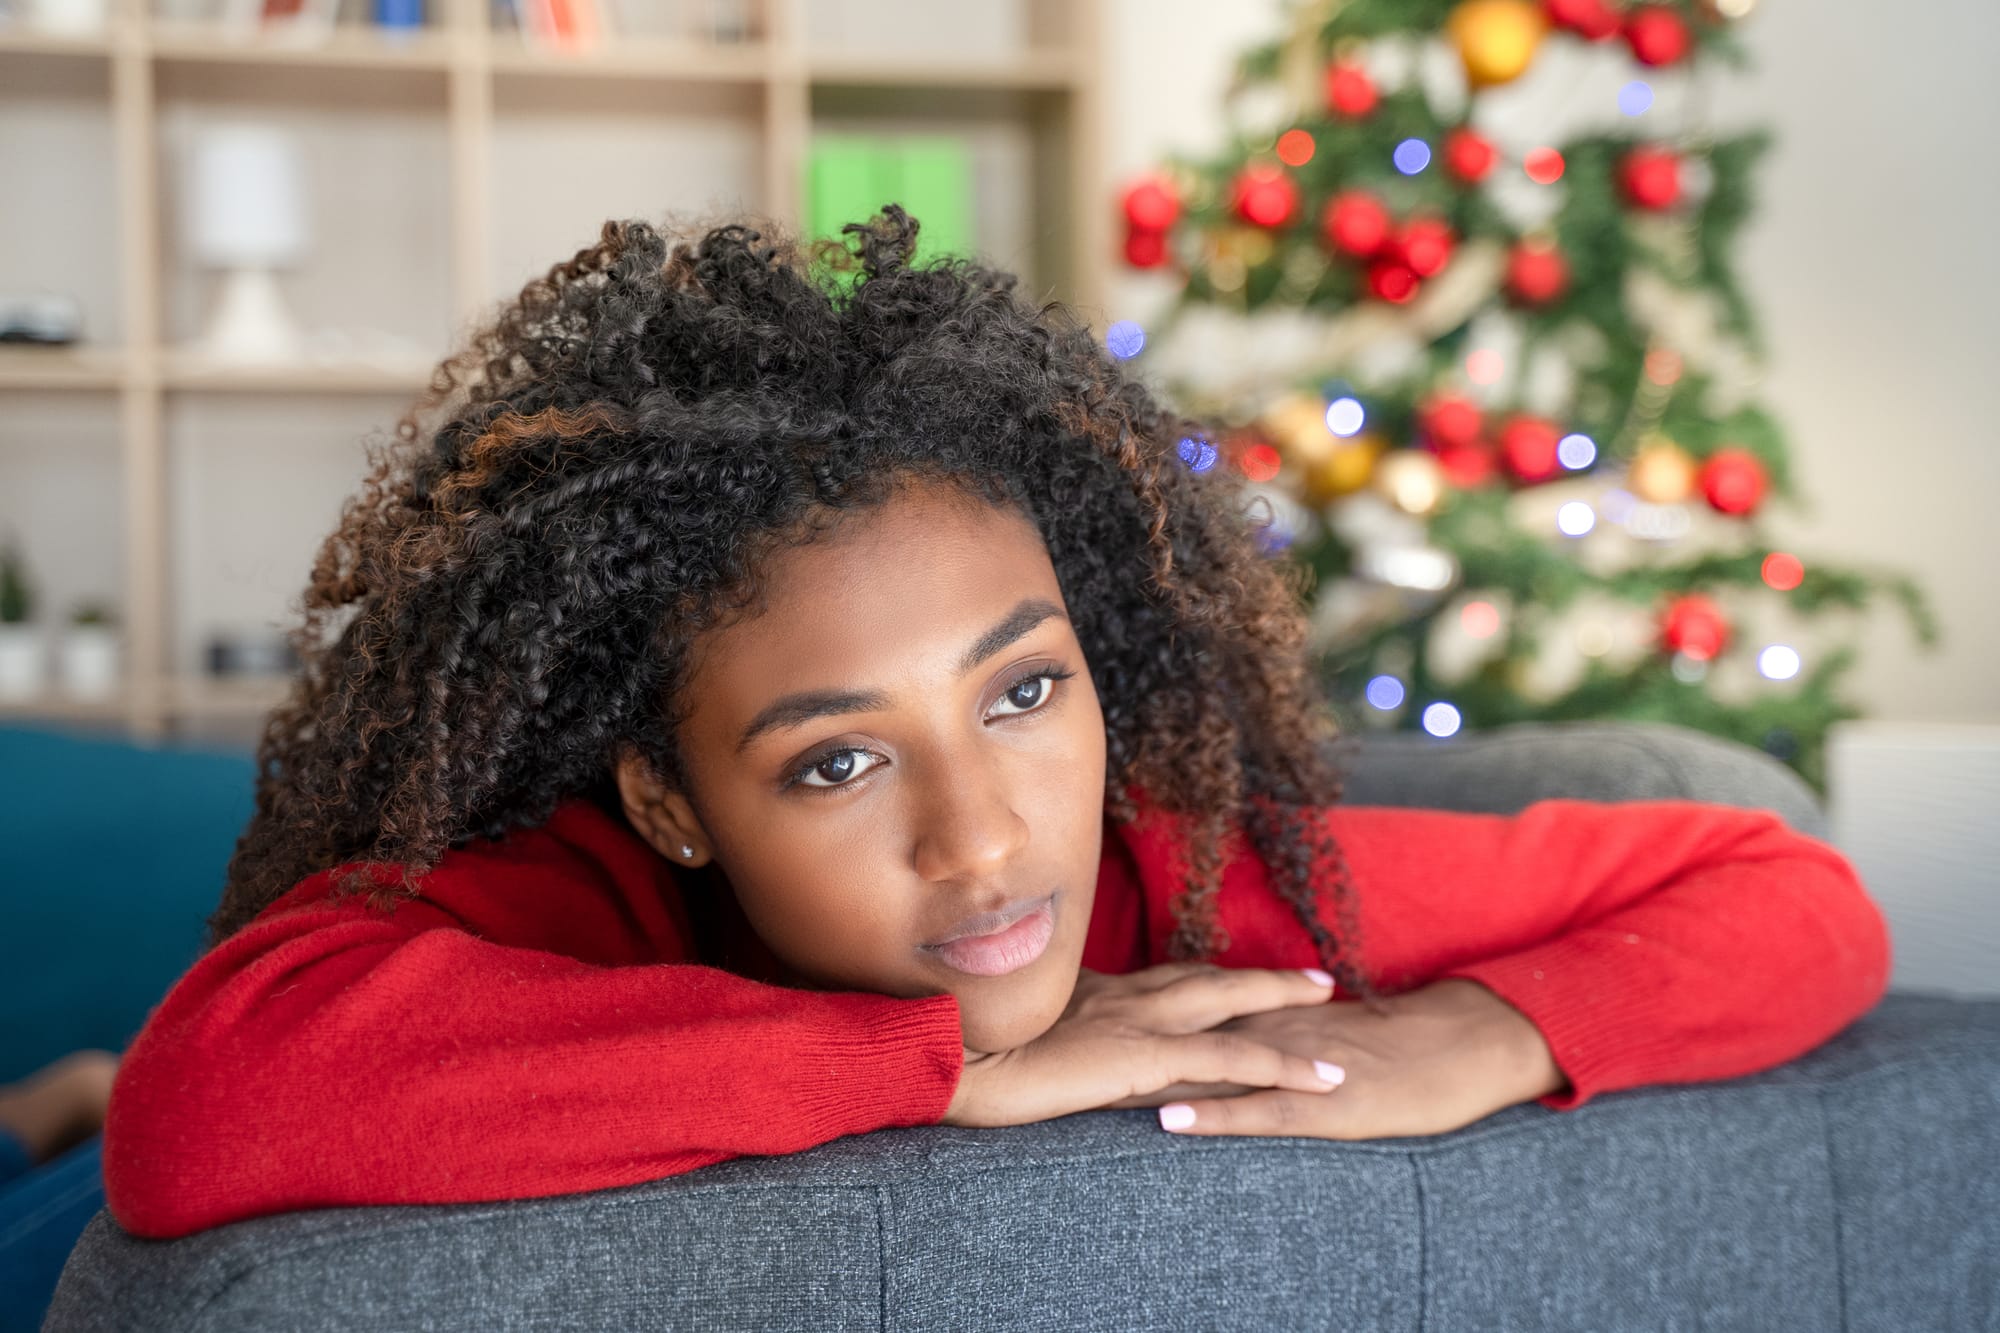 Coping with cancer and the holidays